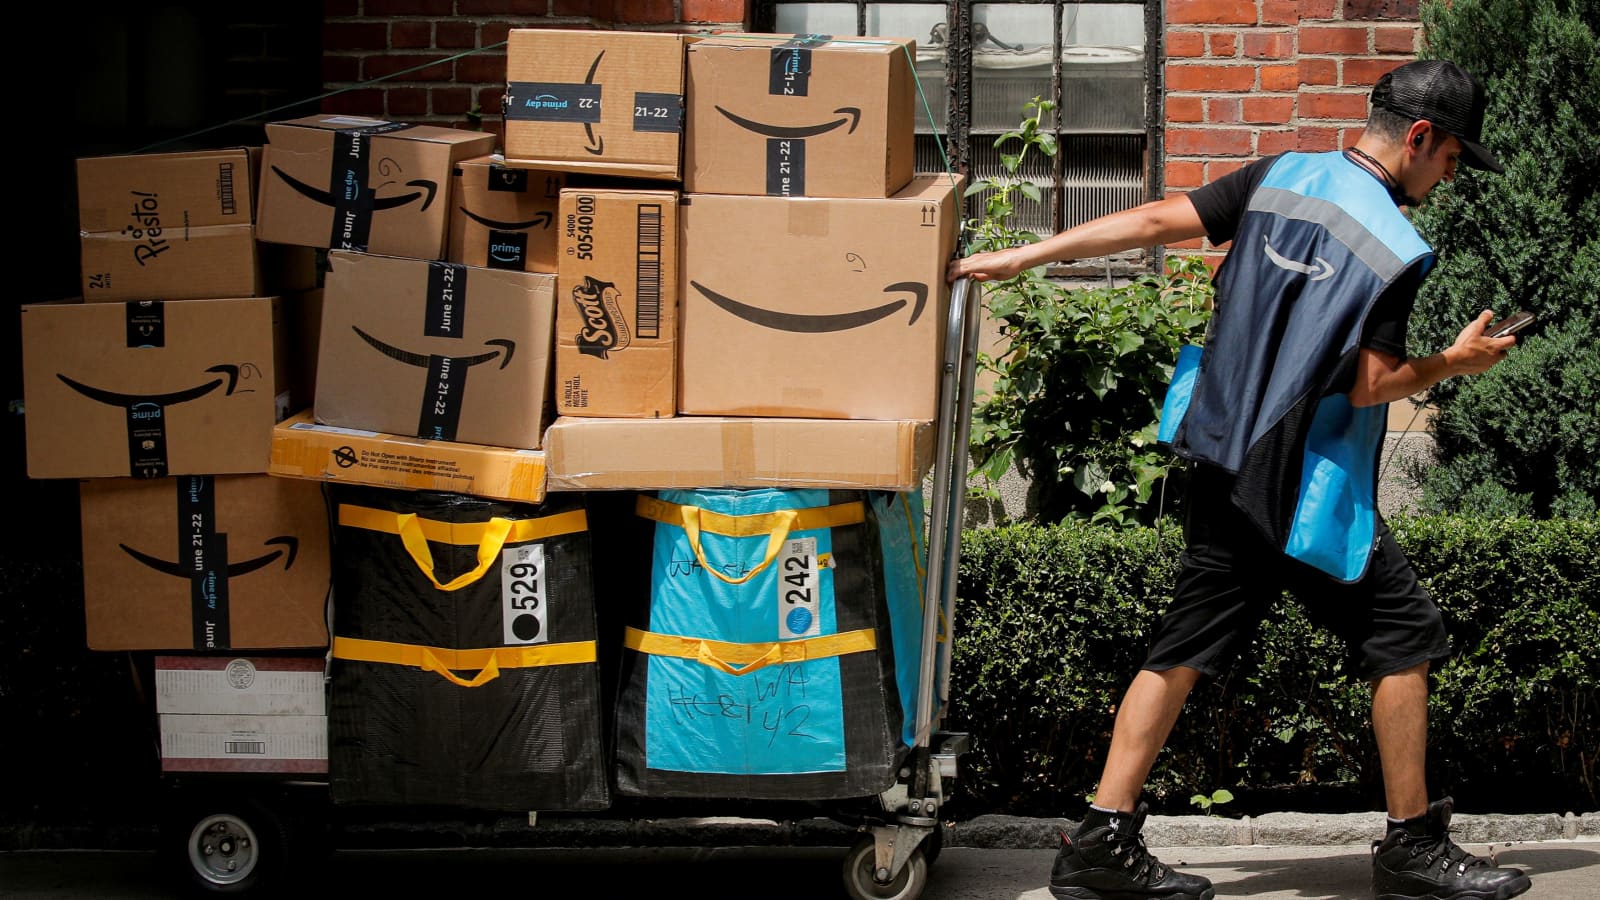 Amazon S Prime Day Results Were More Muted Than Usual This Year